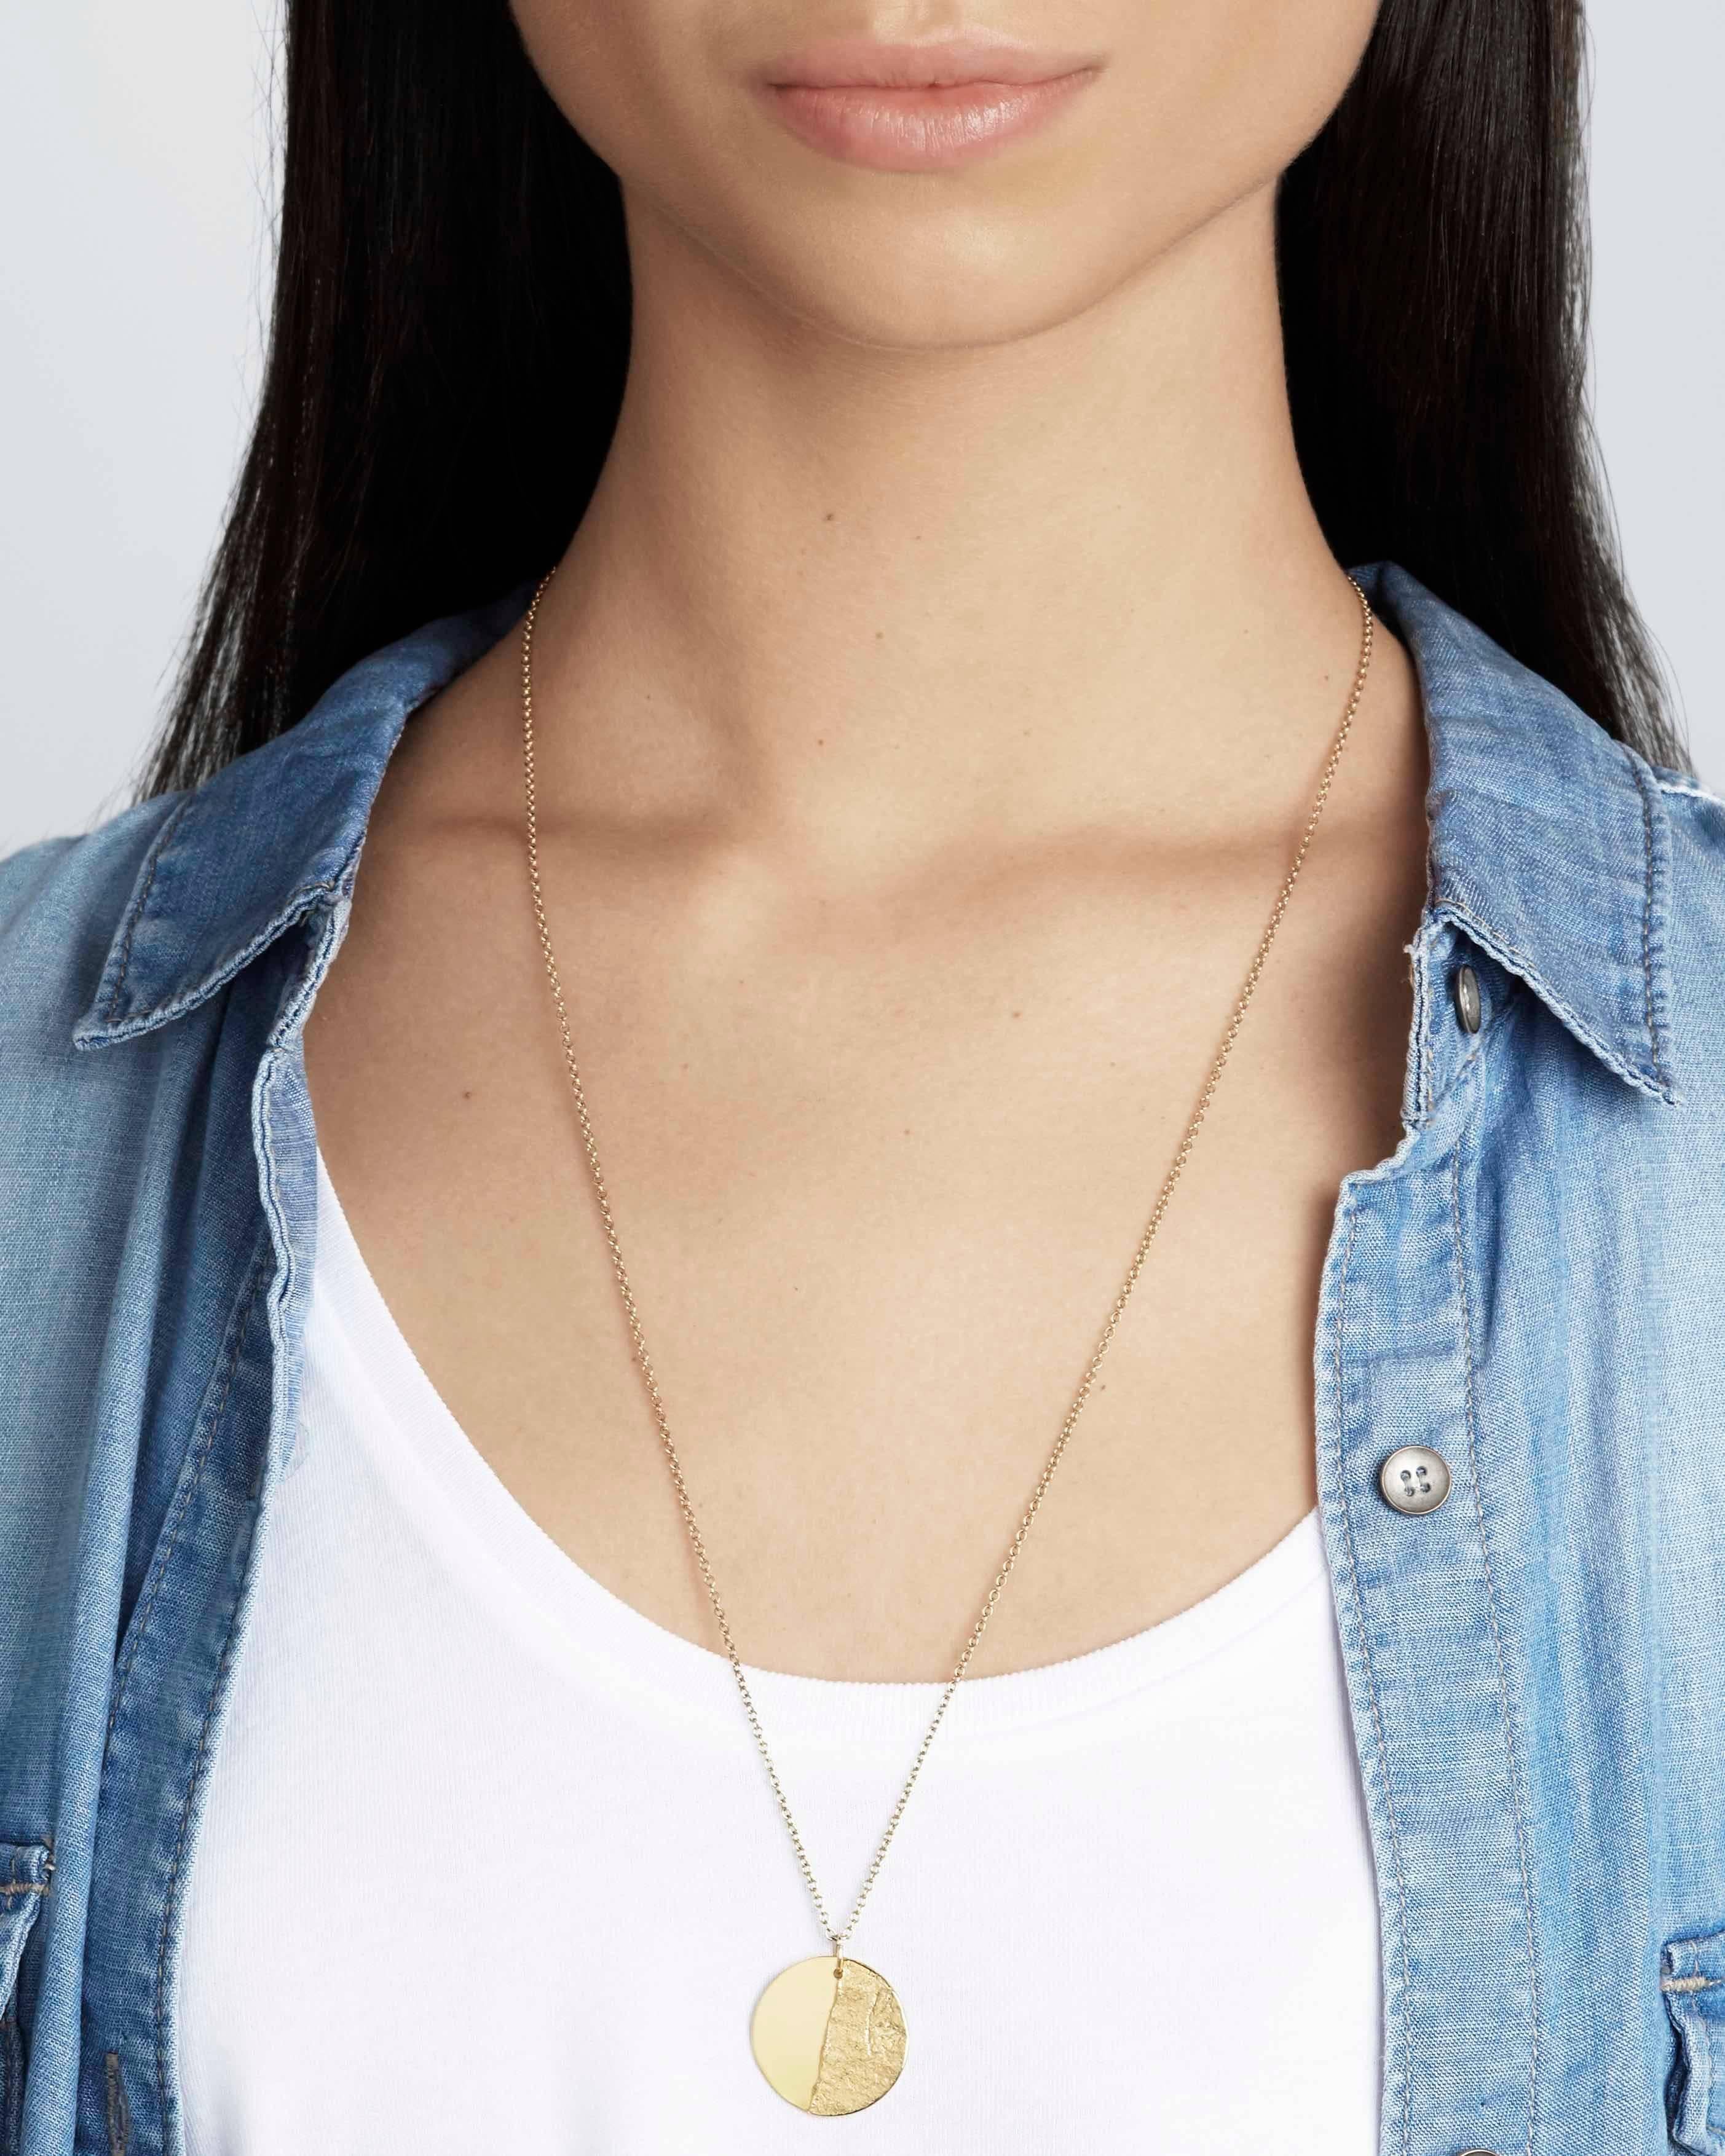 This classic disc pendant necklace crafted in solid 9-carat gold features our signature Paper texture combined with a rustic high-polish finish for the best of both worlds.  The pendant is 22mm in diameter and comes on a 20-inch chain in solid